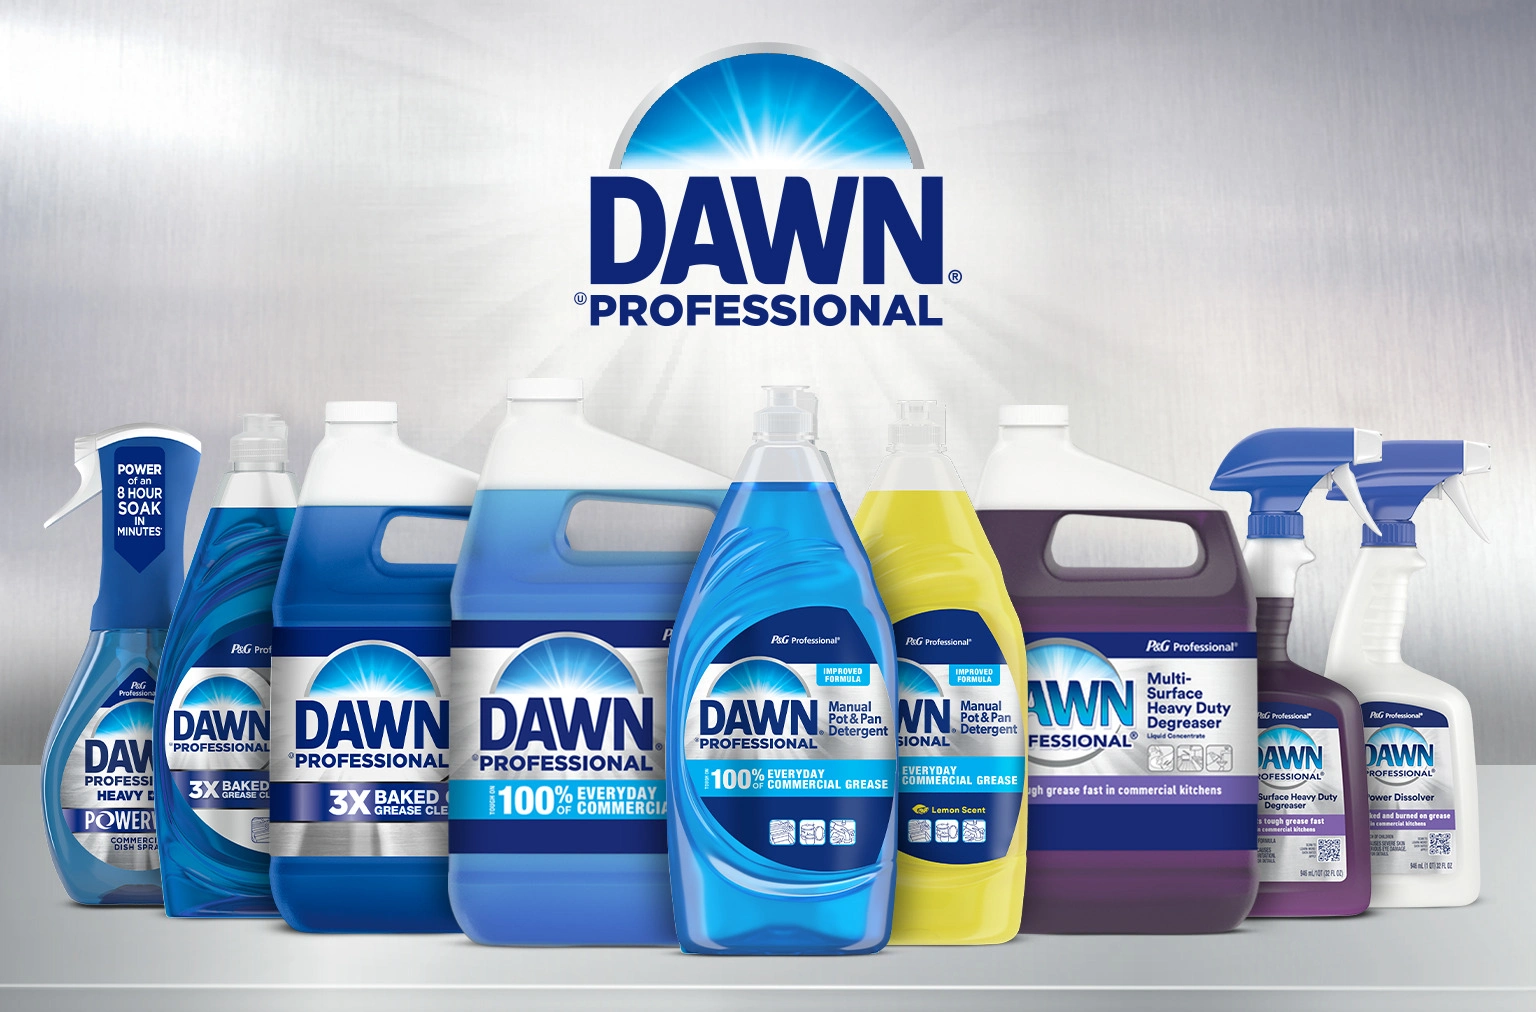 Experience the grease fighting power of Dawn